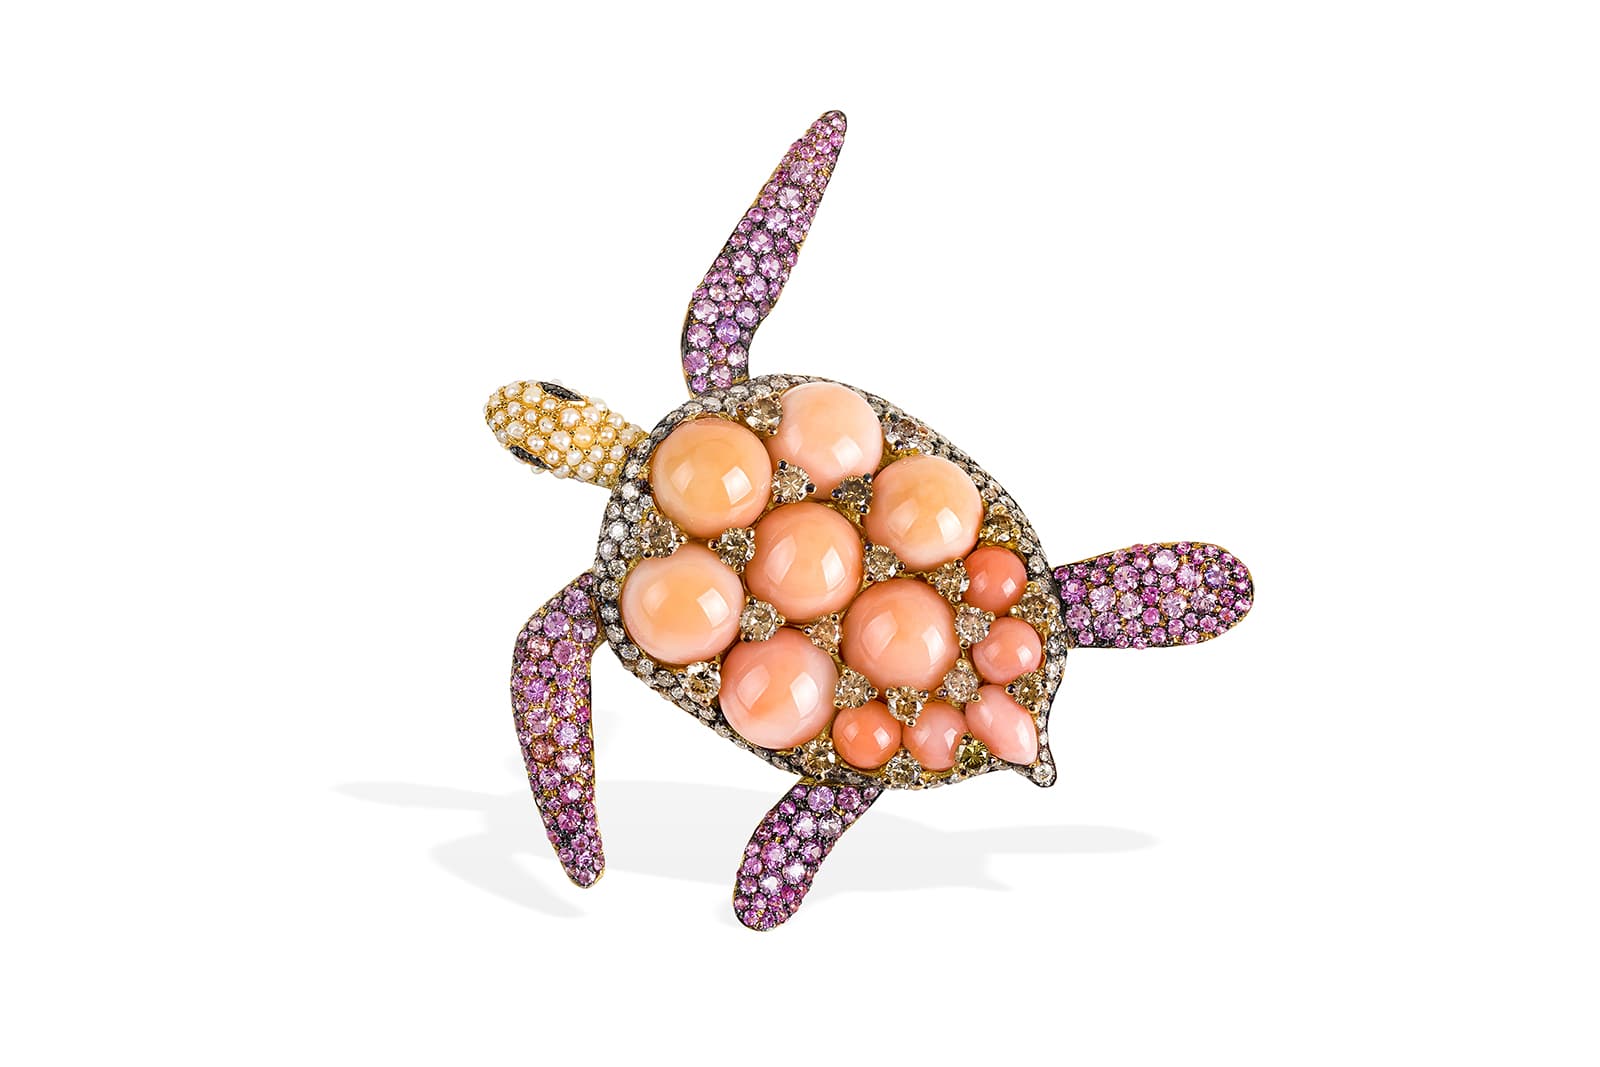 Rosior Turtle brooch with pink coral cabochons, diamonds, sapphires and pearls in 18k yellow gold